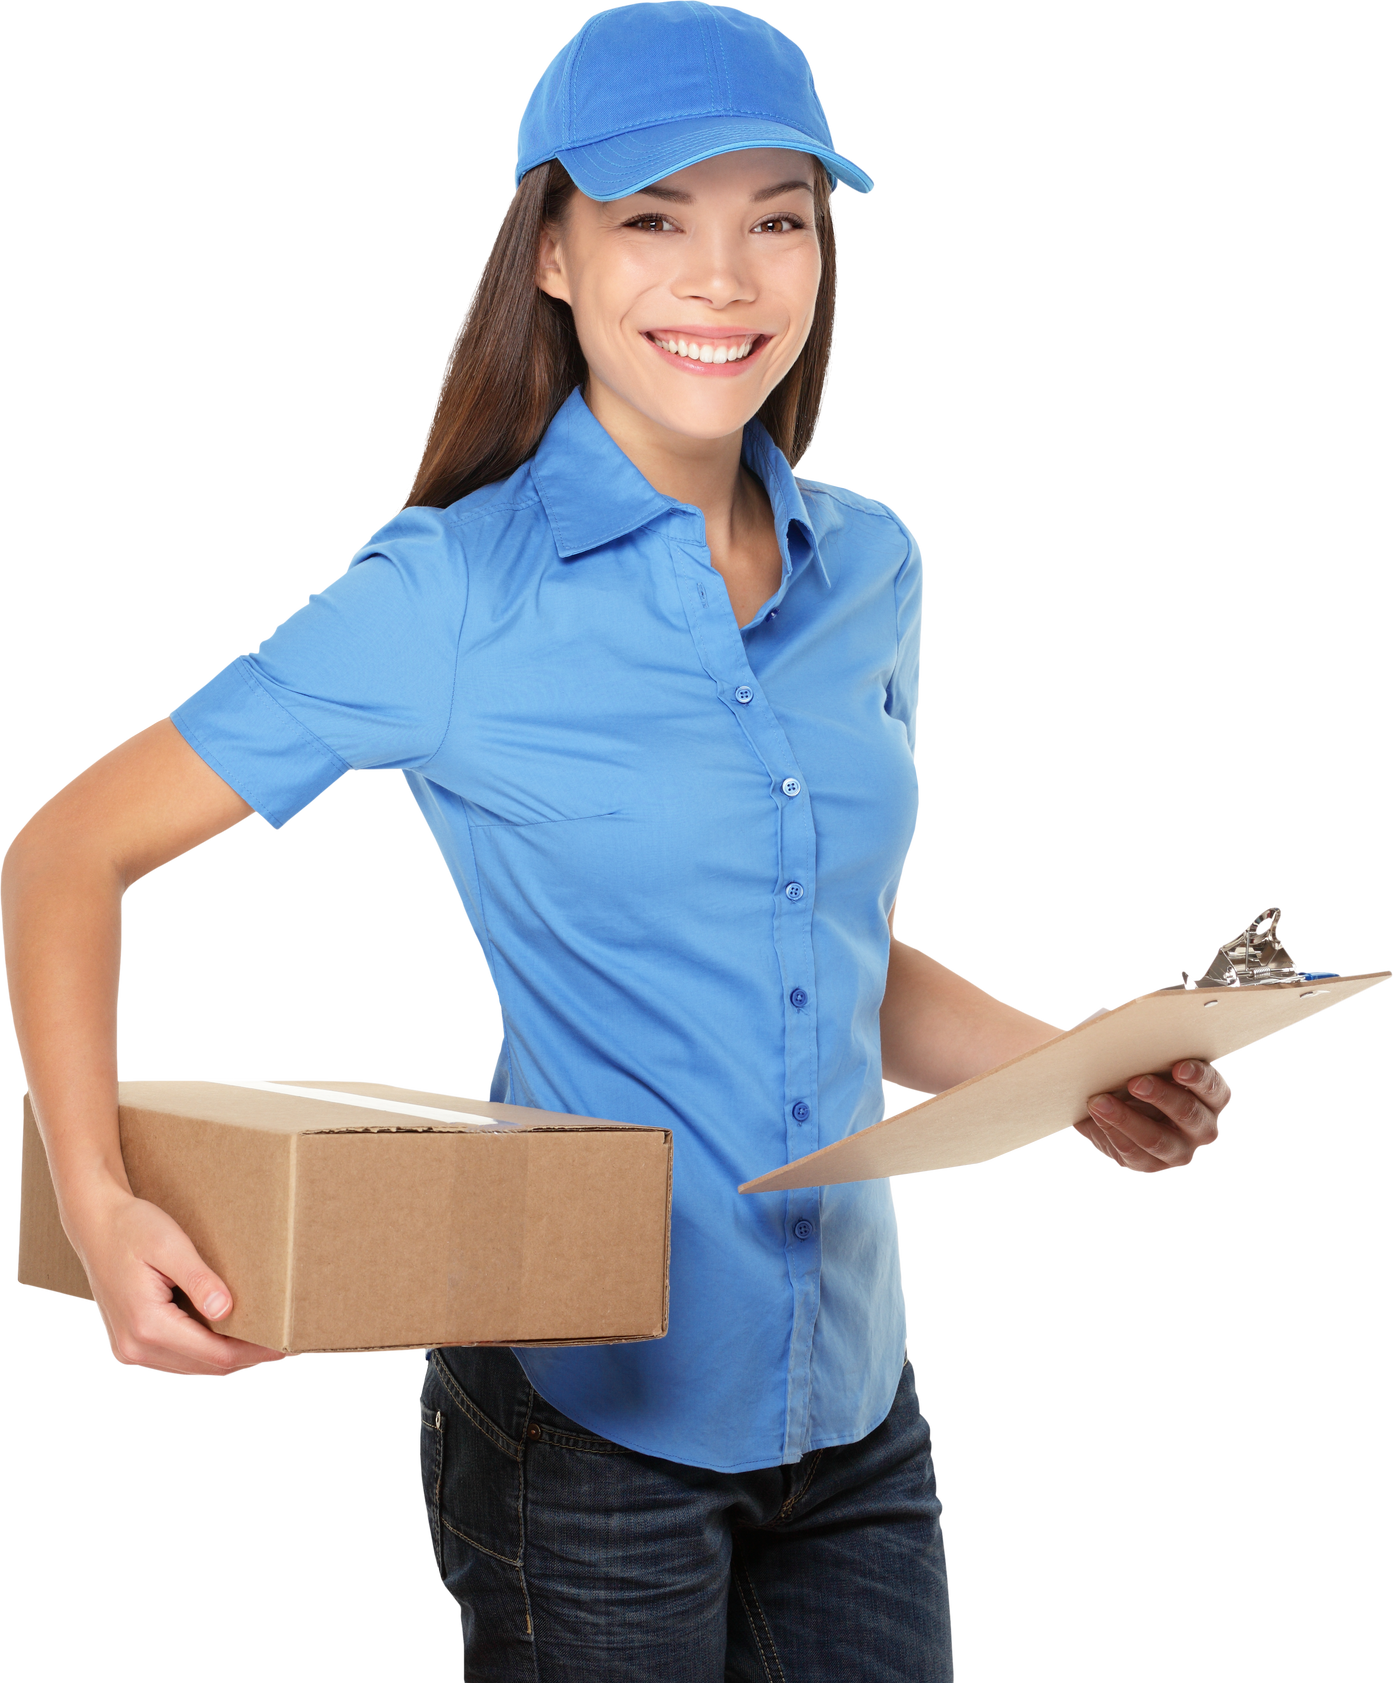 Delivery Person Delivering Package